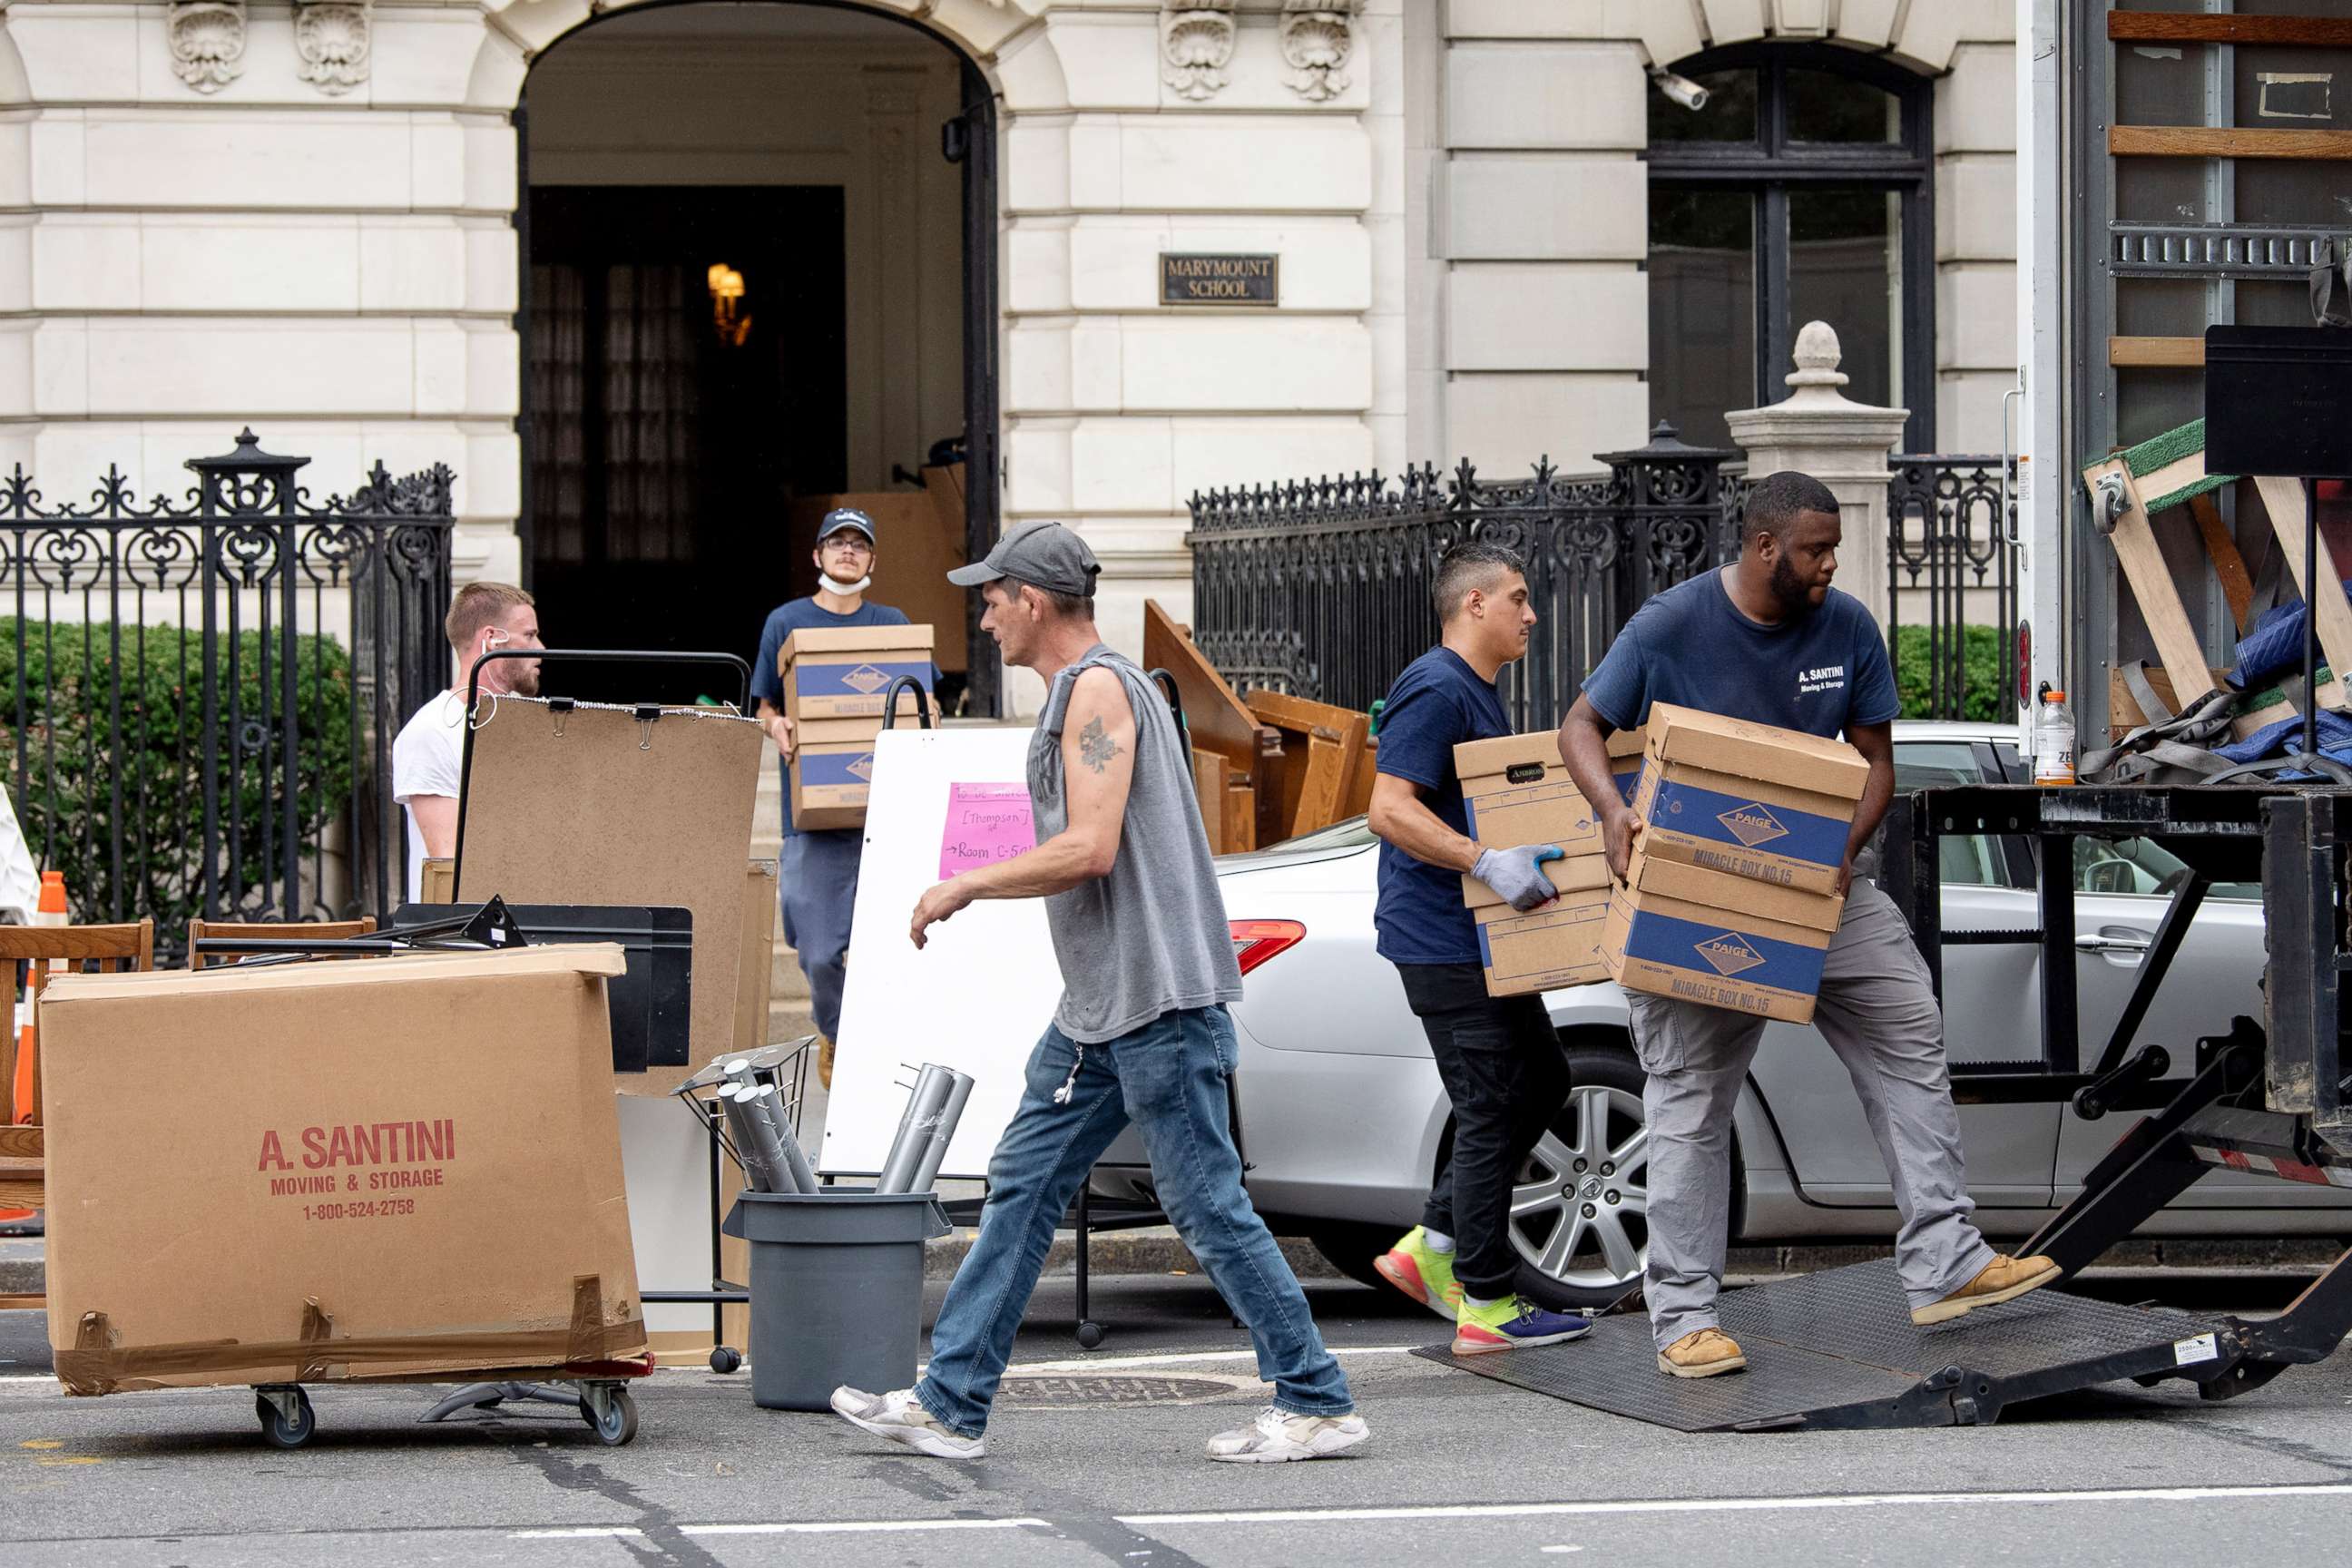 PHOTO: People carry boxes to a moving truck on the Upper East Side, as the city of New York continues Phase 4 of re-opening following restrictions imposed to slow the spread of Coronavirus on Aug. 29, 2020.  